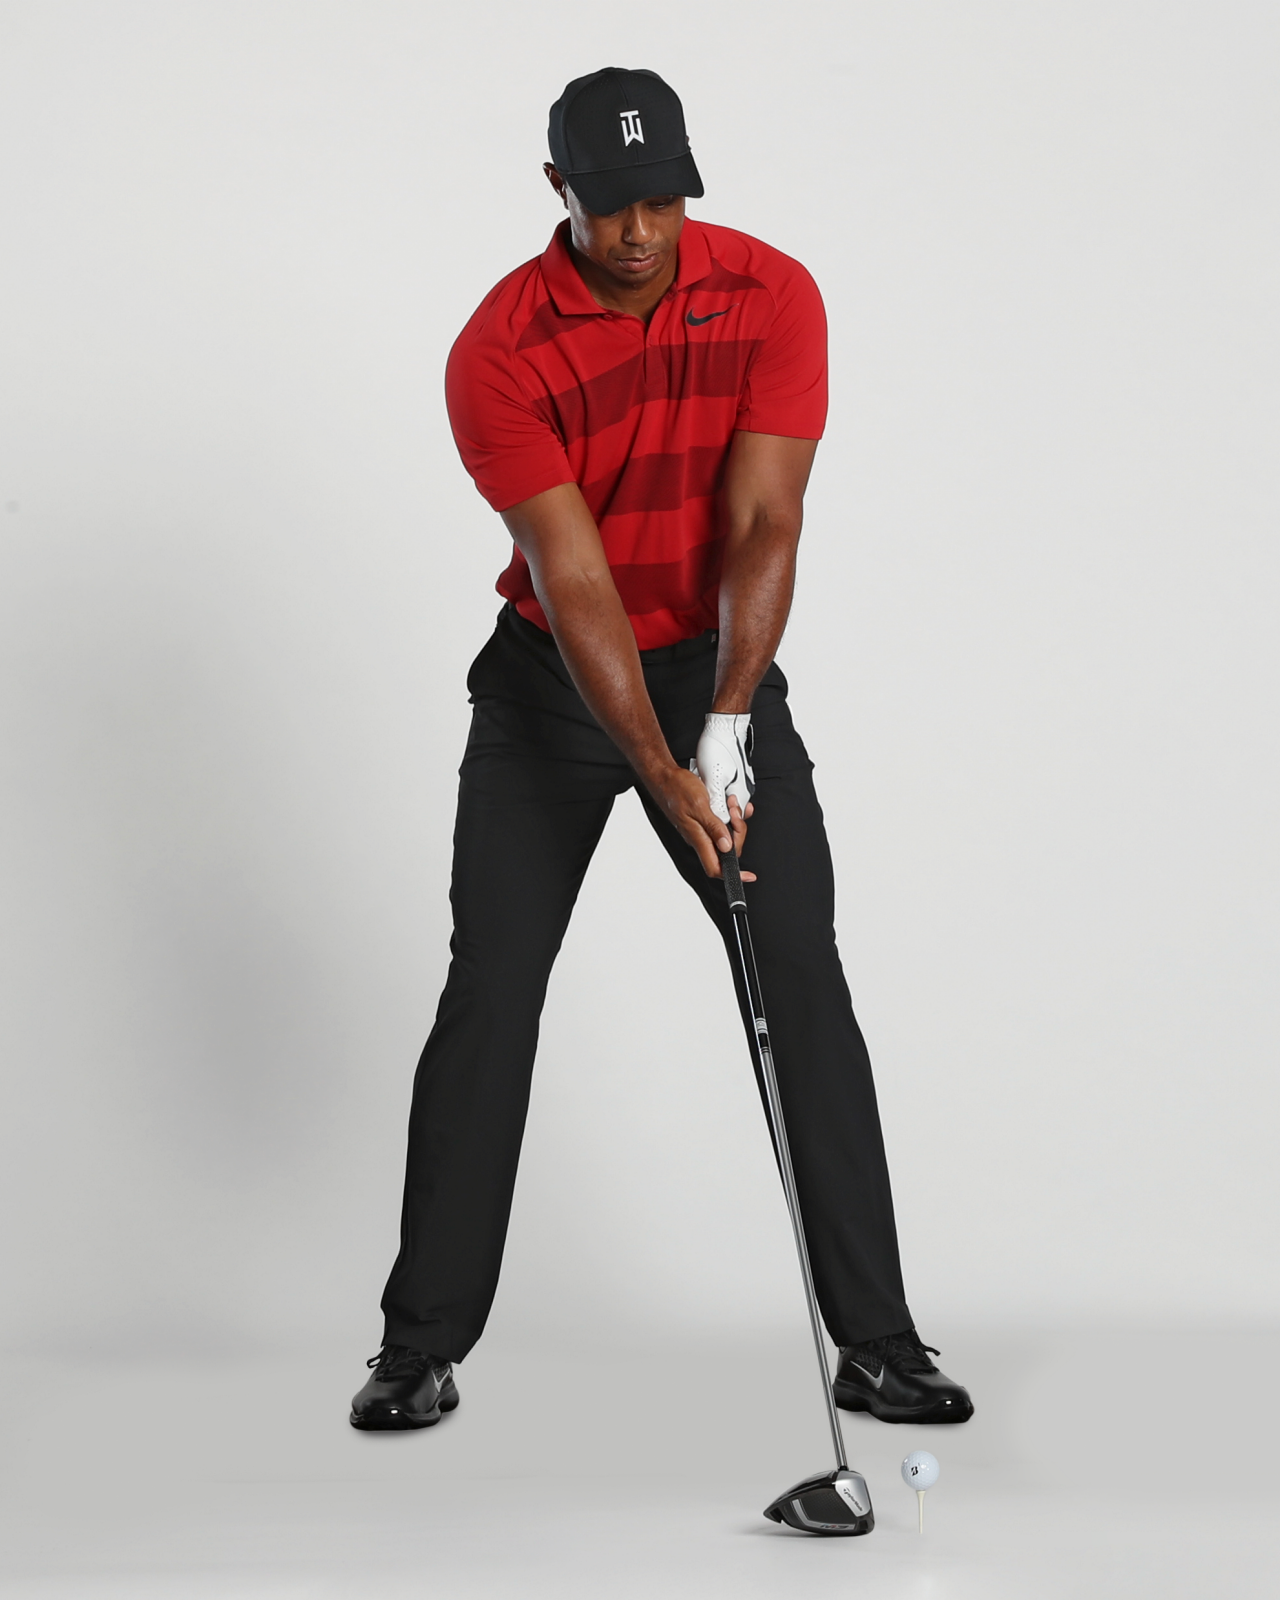 An exclusive look at Tiger Woods' new swing | Instruction | Golf Digest